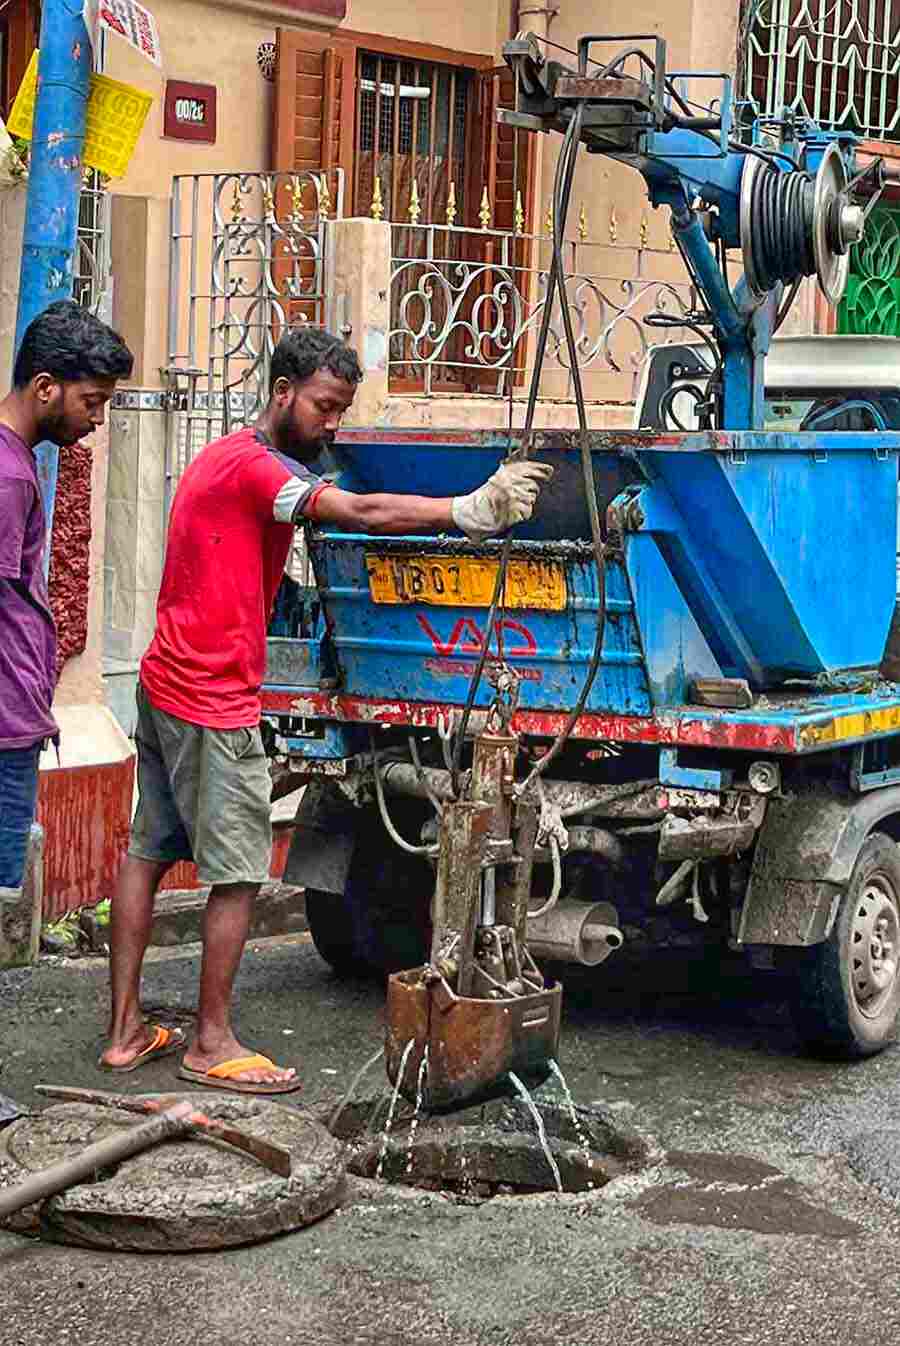 Kolkata Municipal Corporation’s (KMC) Solid Waste Management (SWM) department cleared the underground sewage channels to prevent water logging at Ward no. 50 in central Kolkata on Friday   